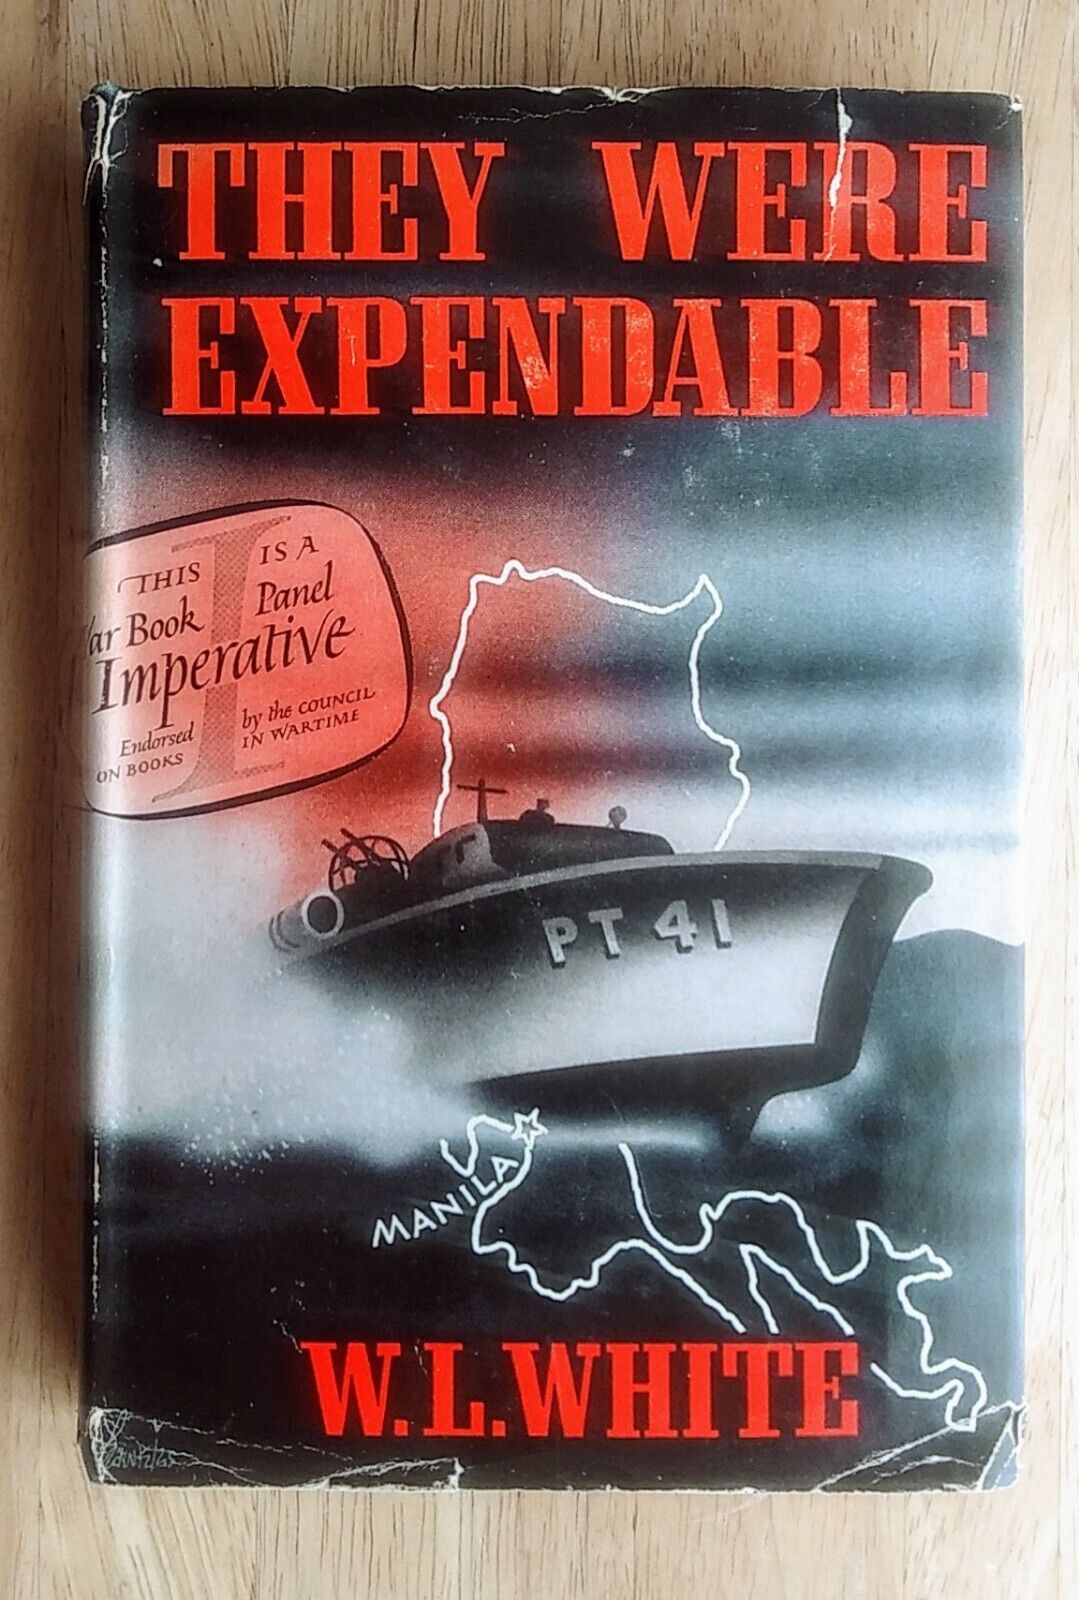 They Were Expendable by W.L.White WWII Book